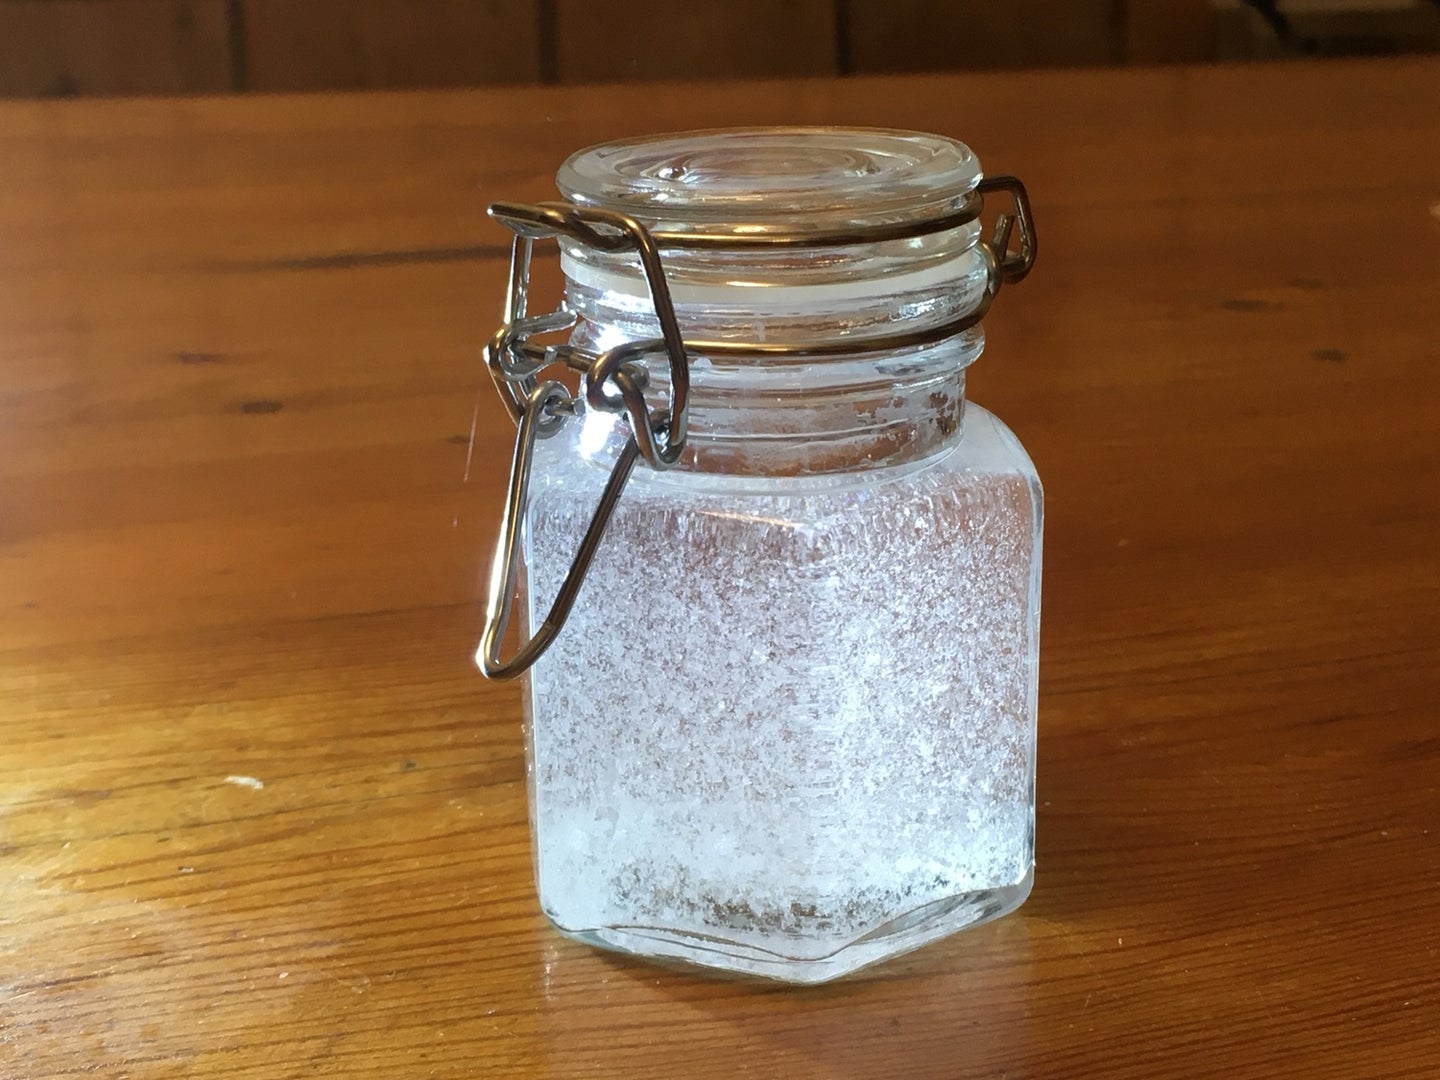 a storm glass on a wooden surface